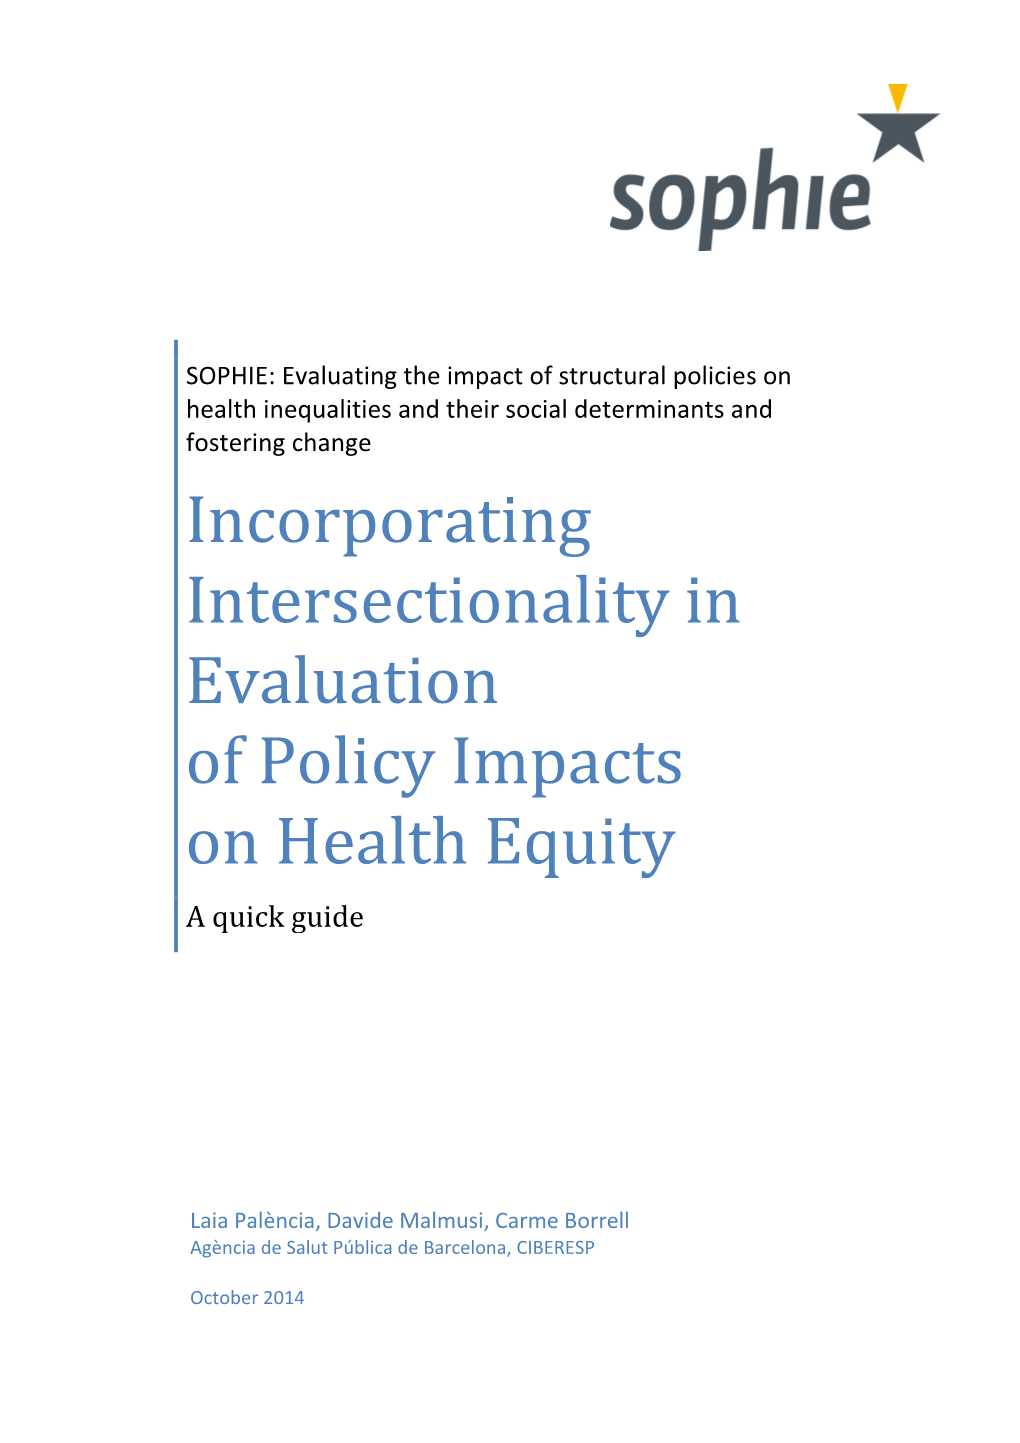 Incorporating Intersectionality in Evaluation of Policy Impacts on Health Equity a Quick Guide